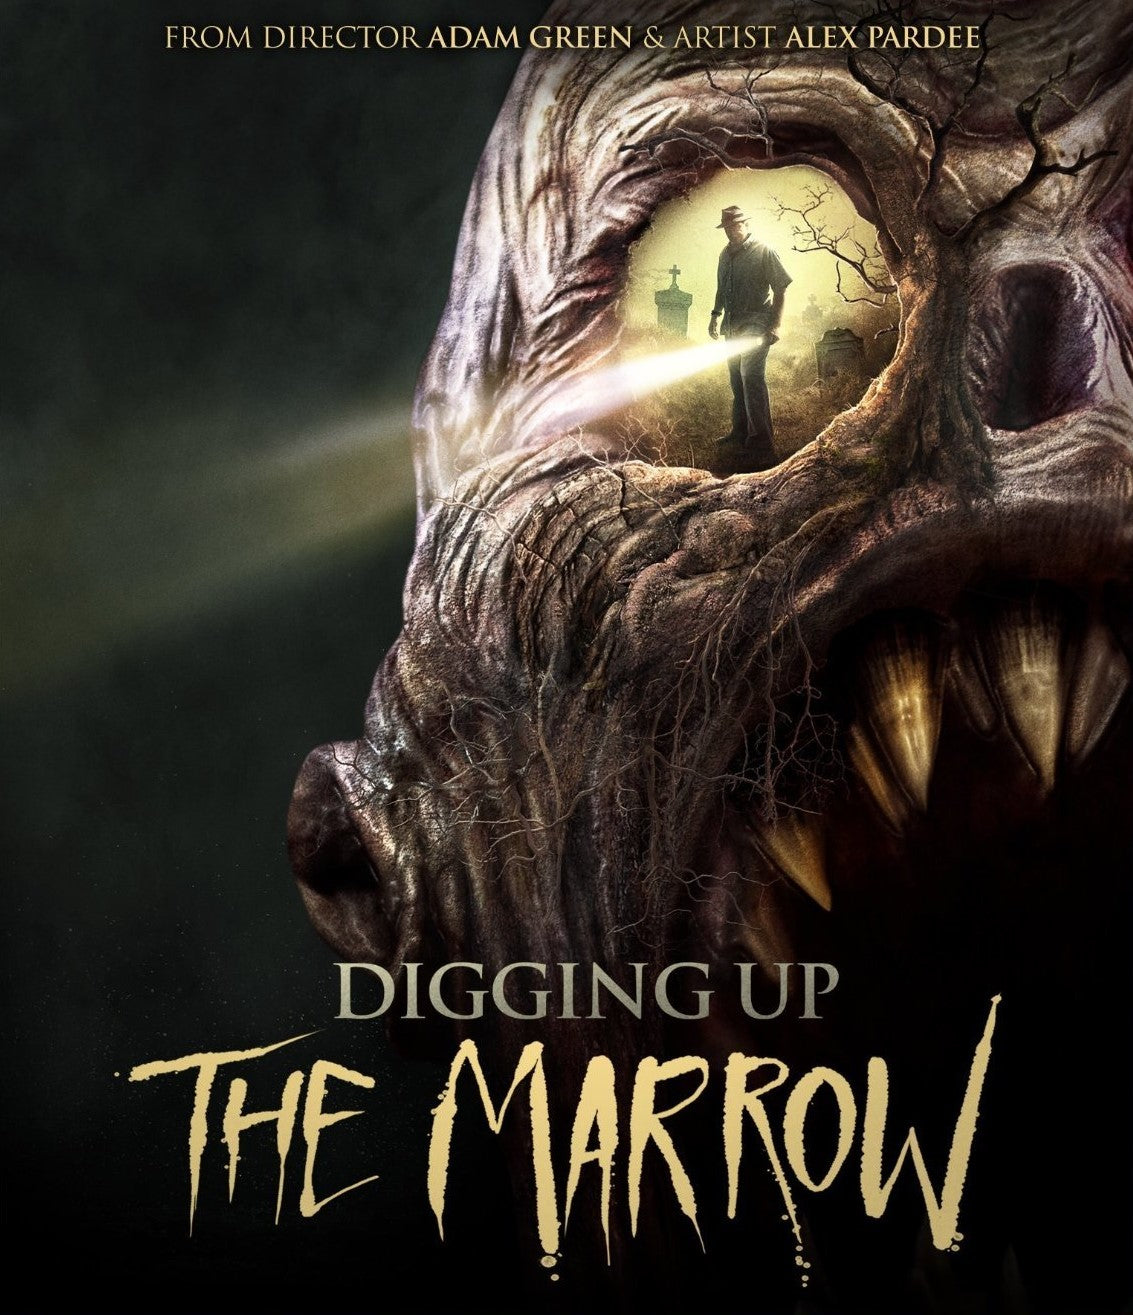 DIGGING UP THE MARROW BLU-RAY